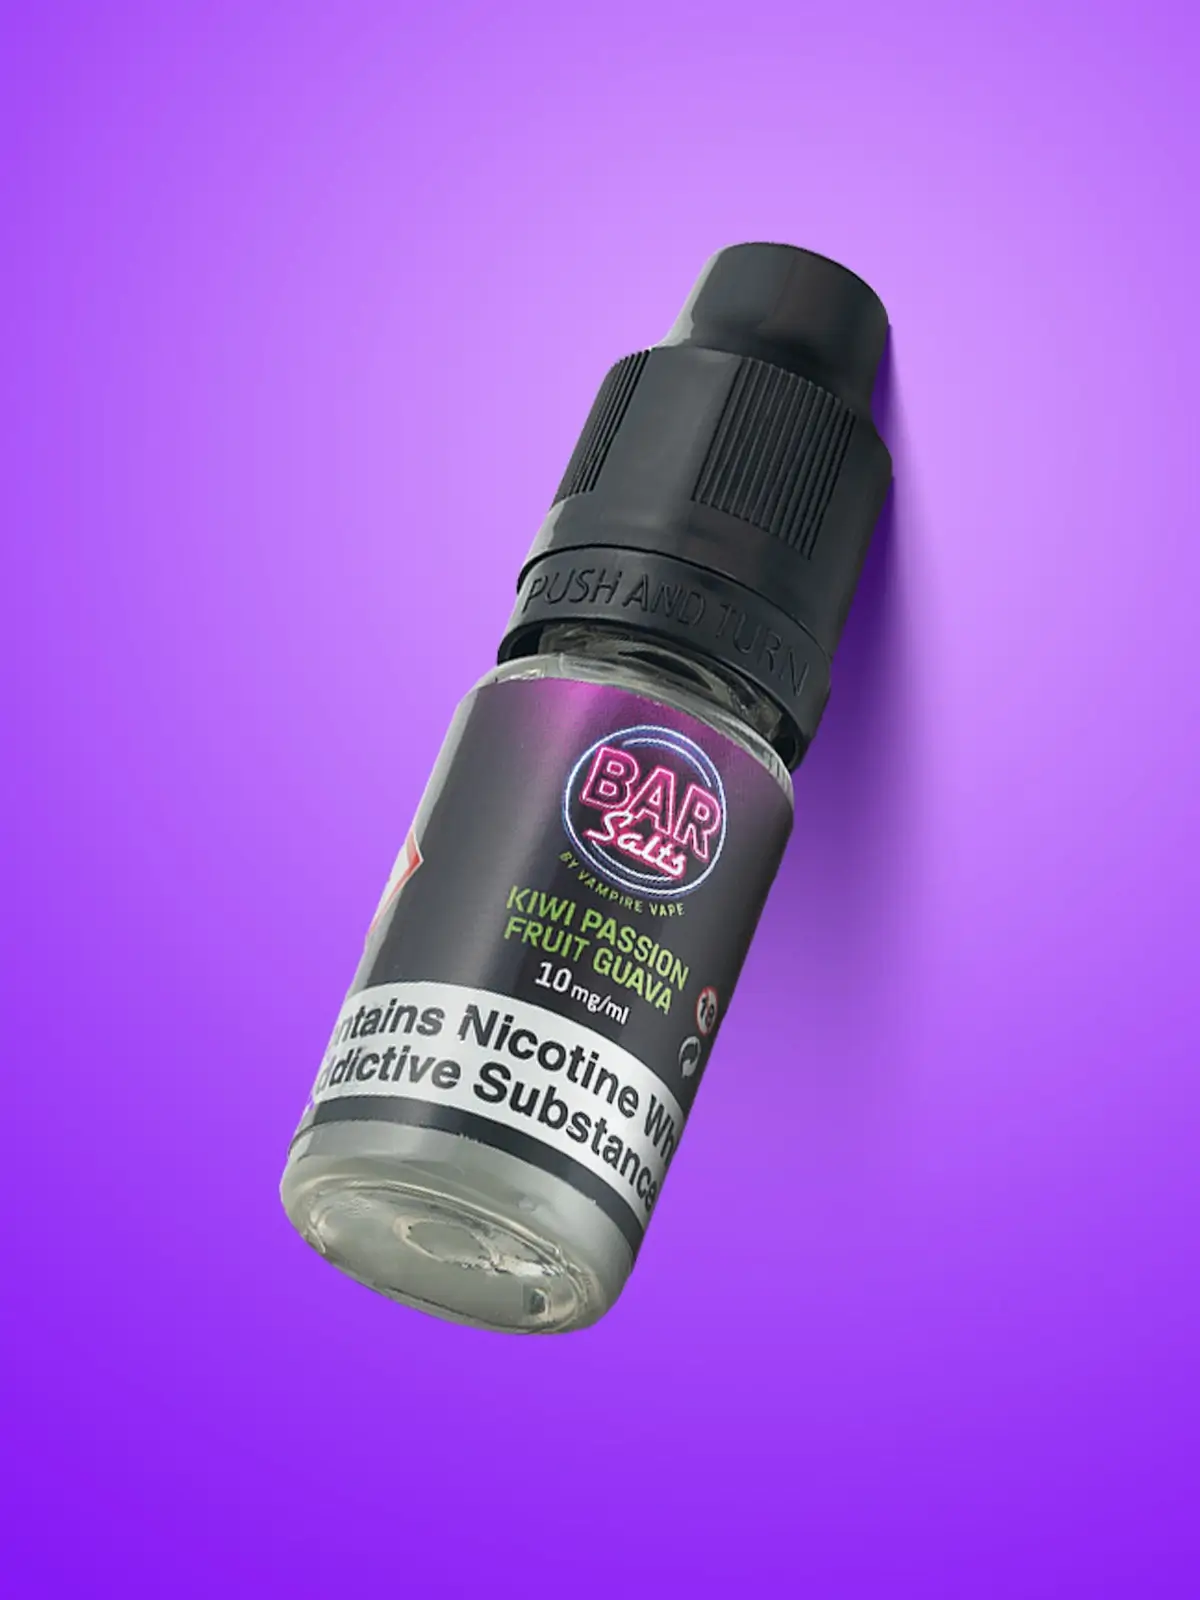 A bottle of Kiwi Passion Fruit Guava Vampire Vape Bar Salts Floating in front of a purple background